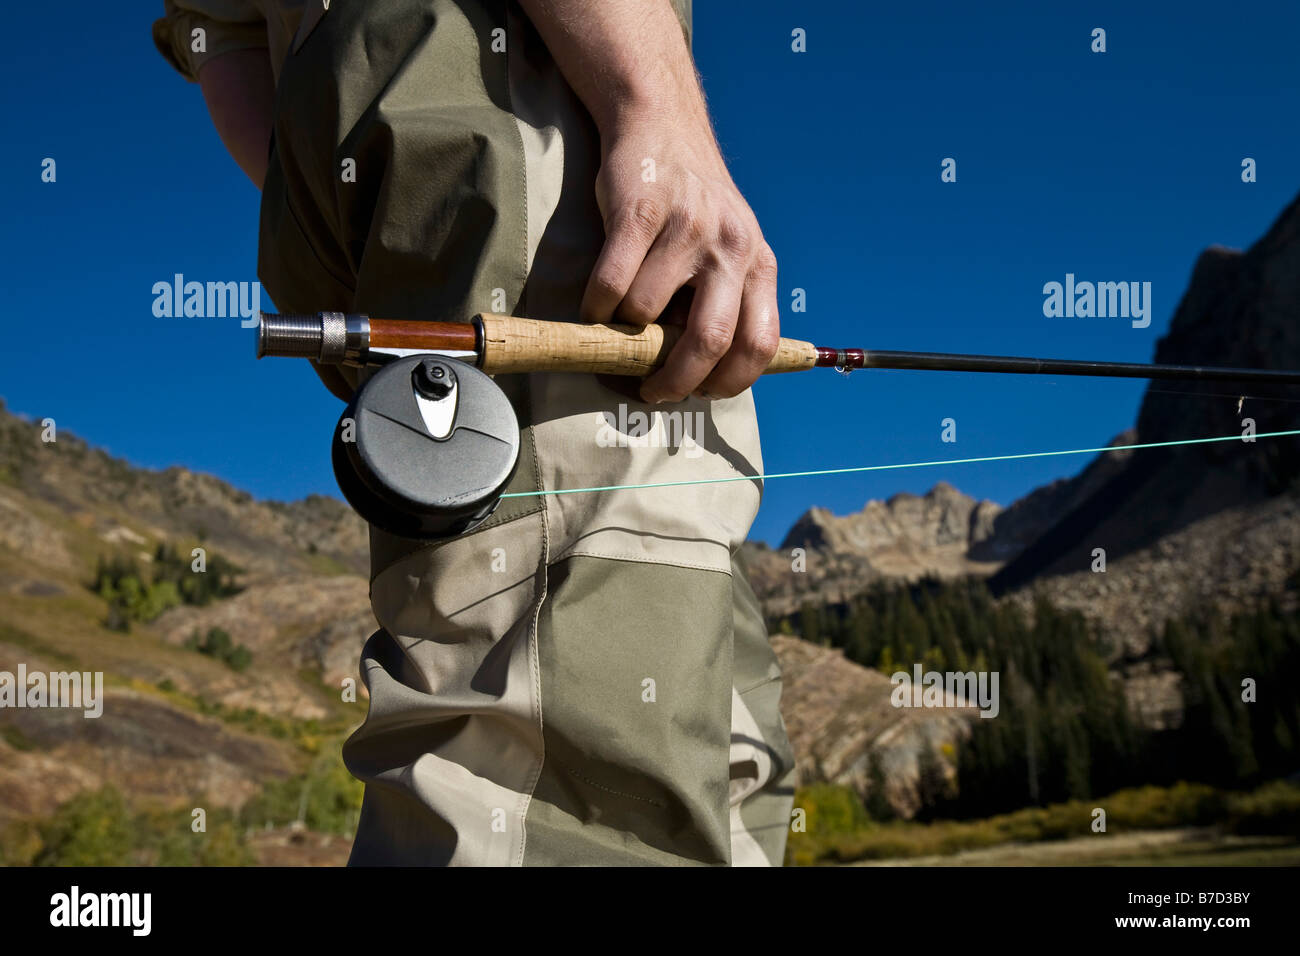 Midsection of a man holding a fly rod Stock Photo